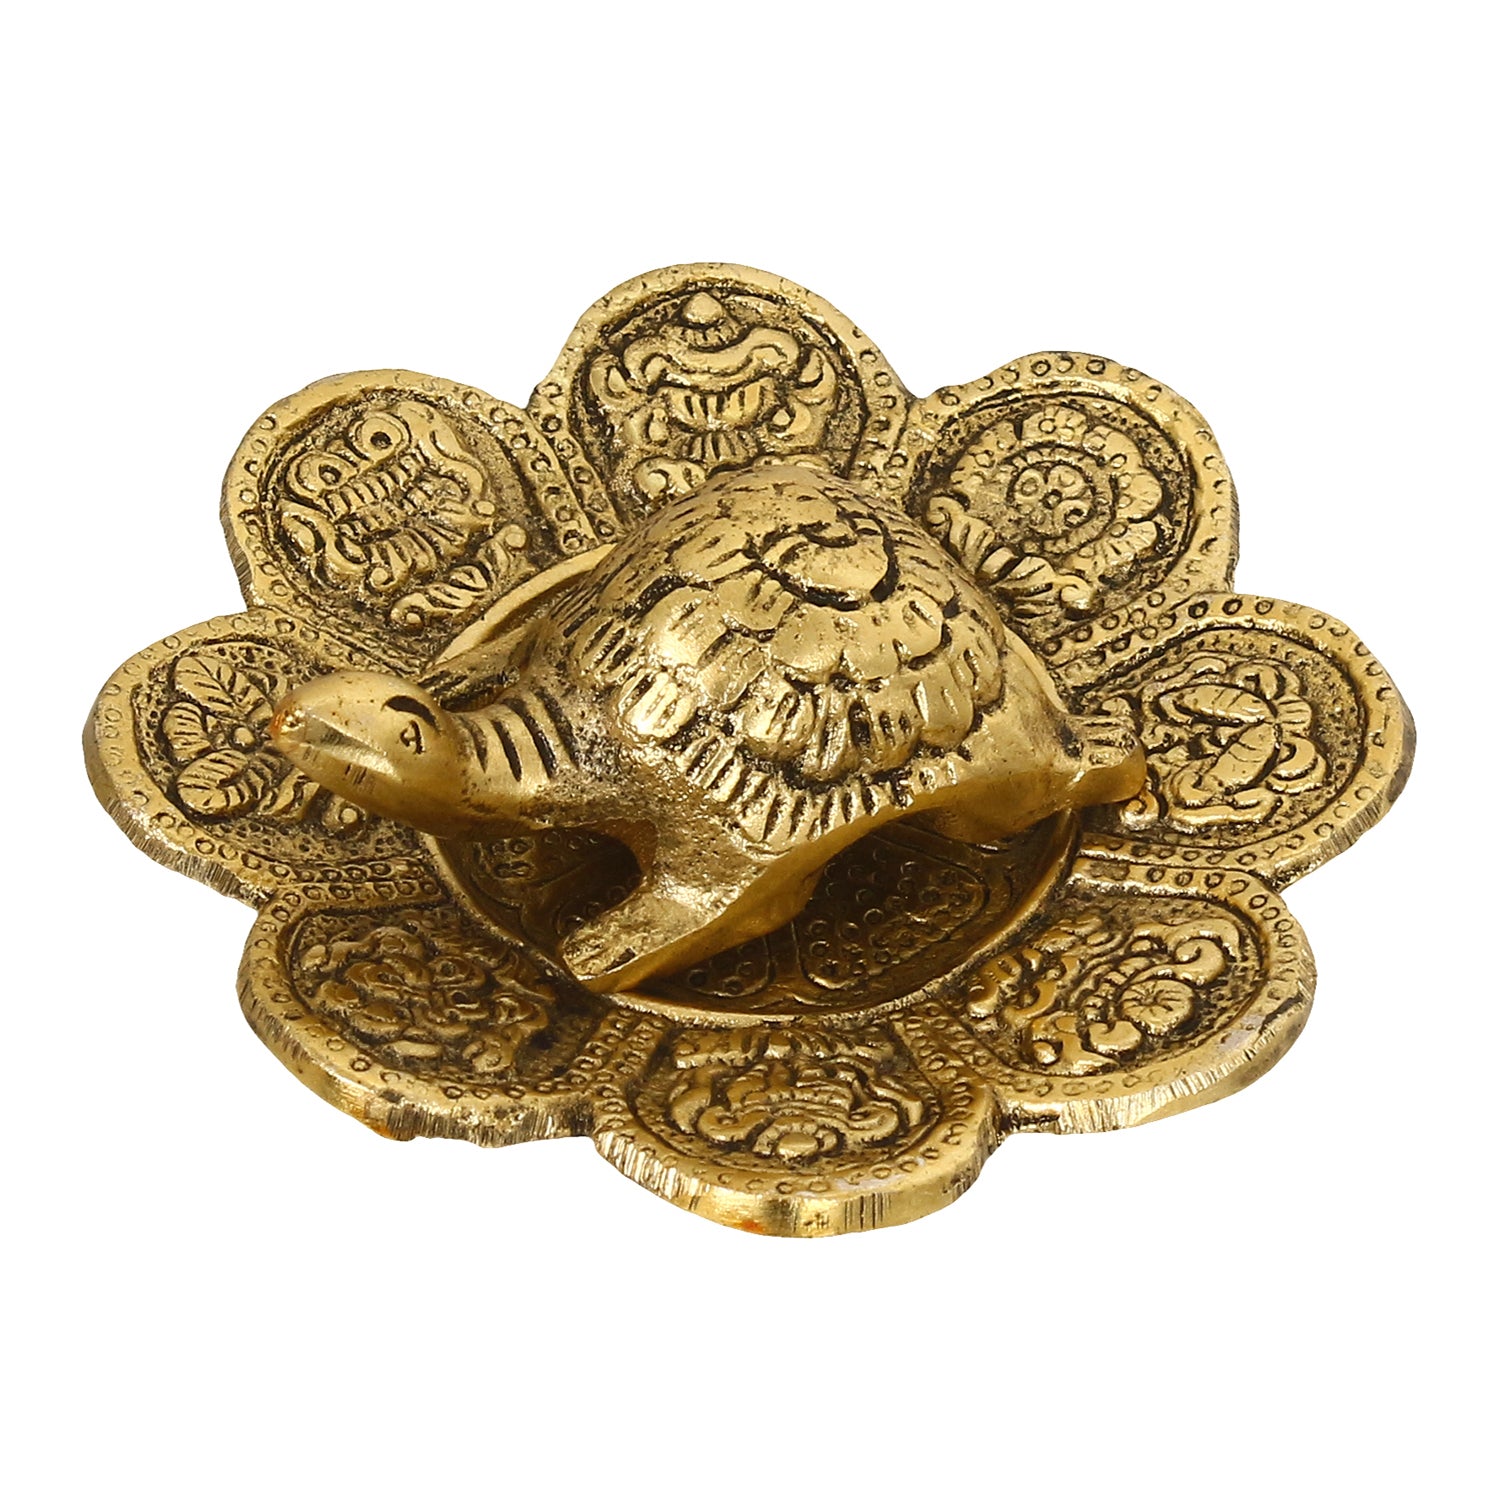 Feng Shui Tortoise with decorative plate for offices and home 2